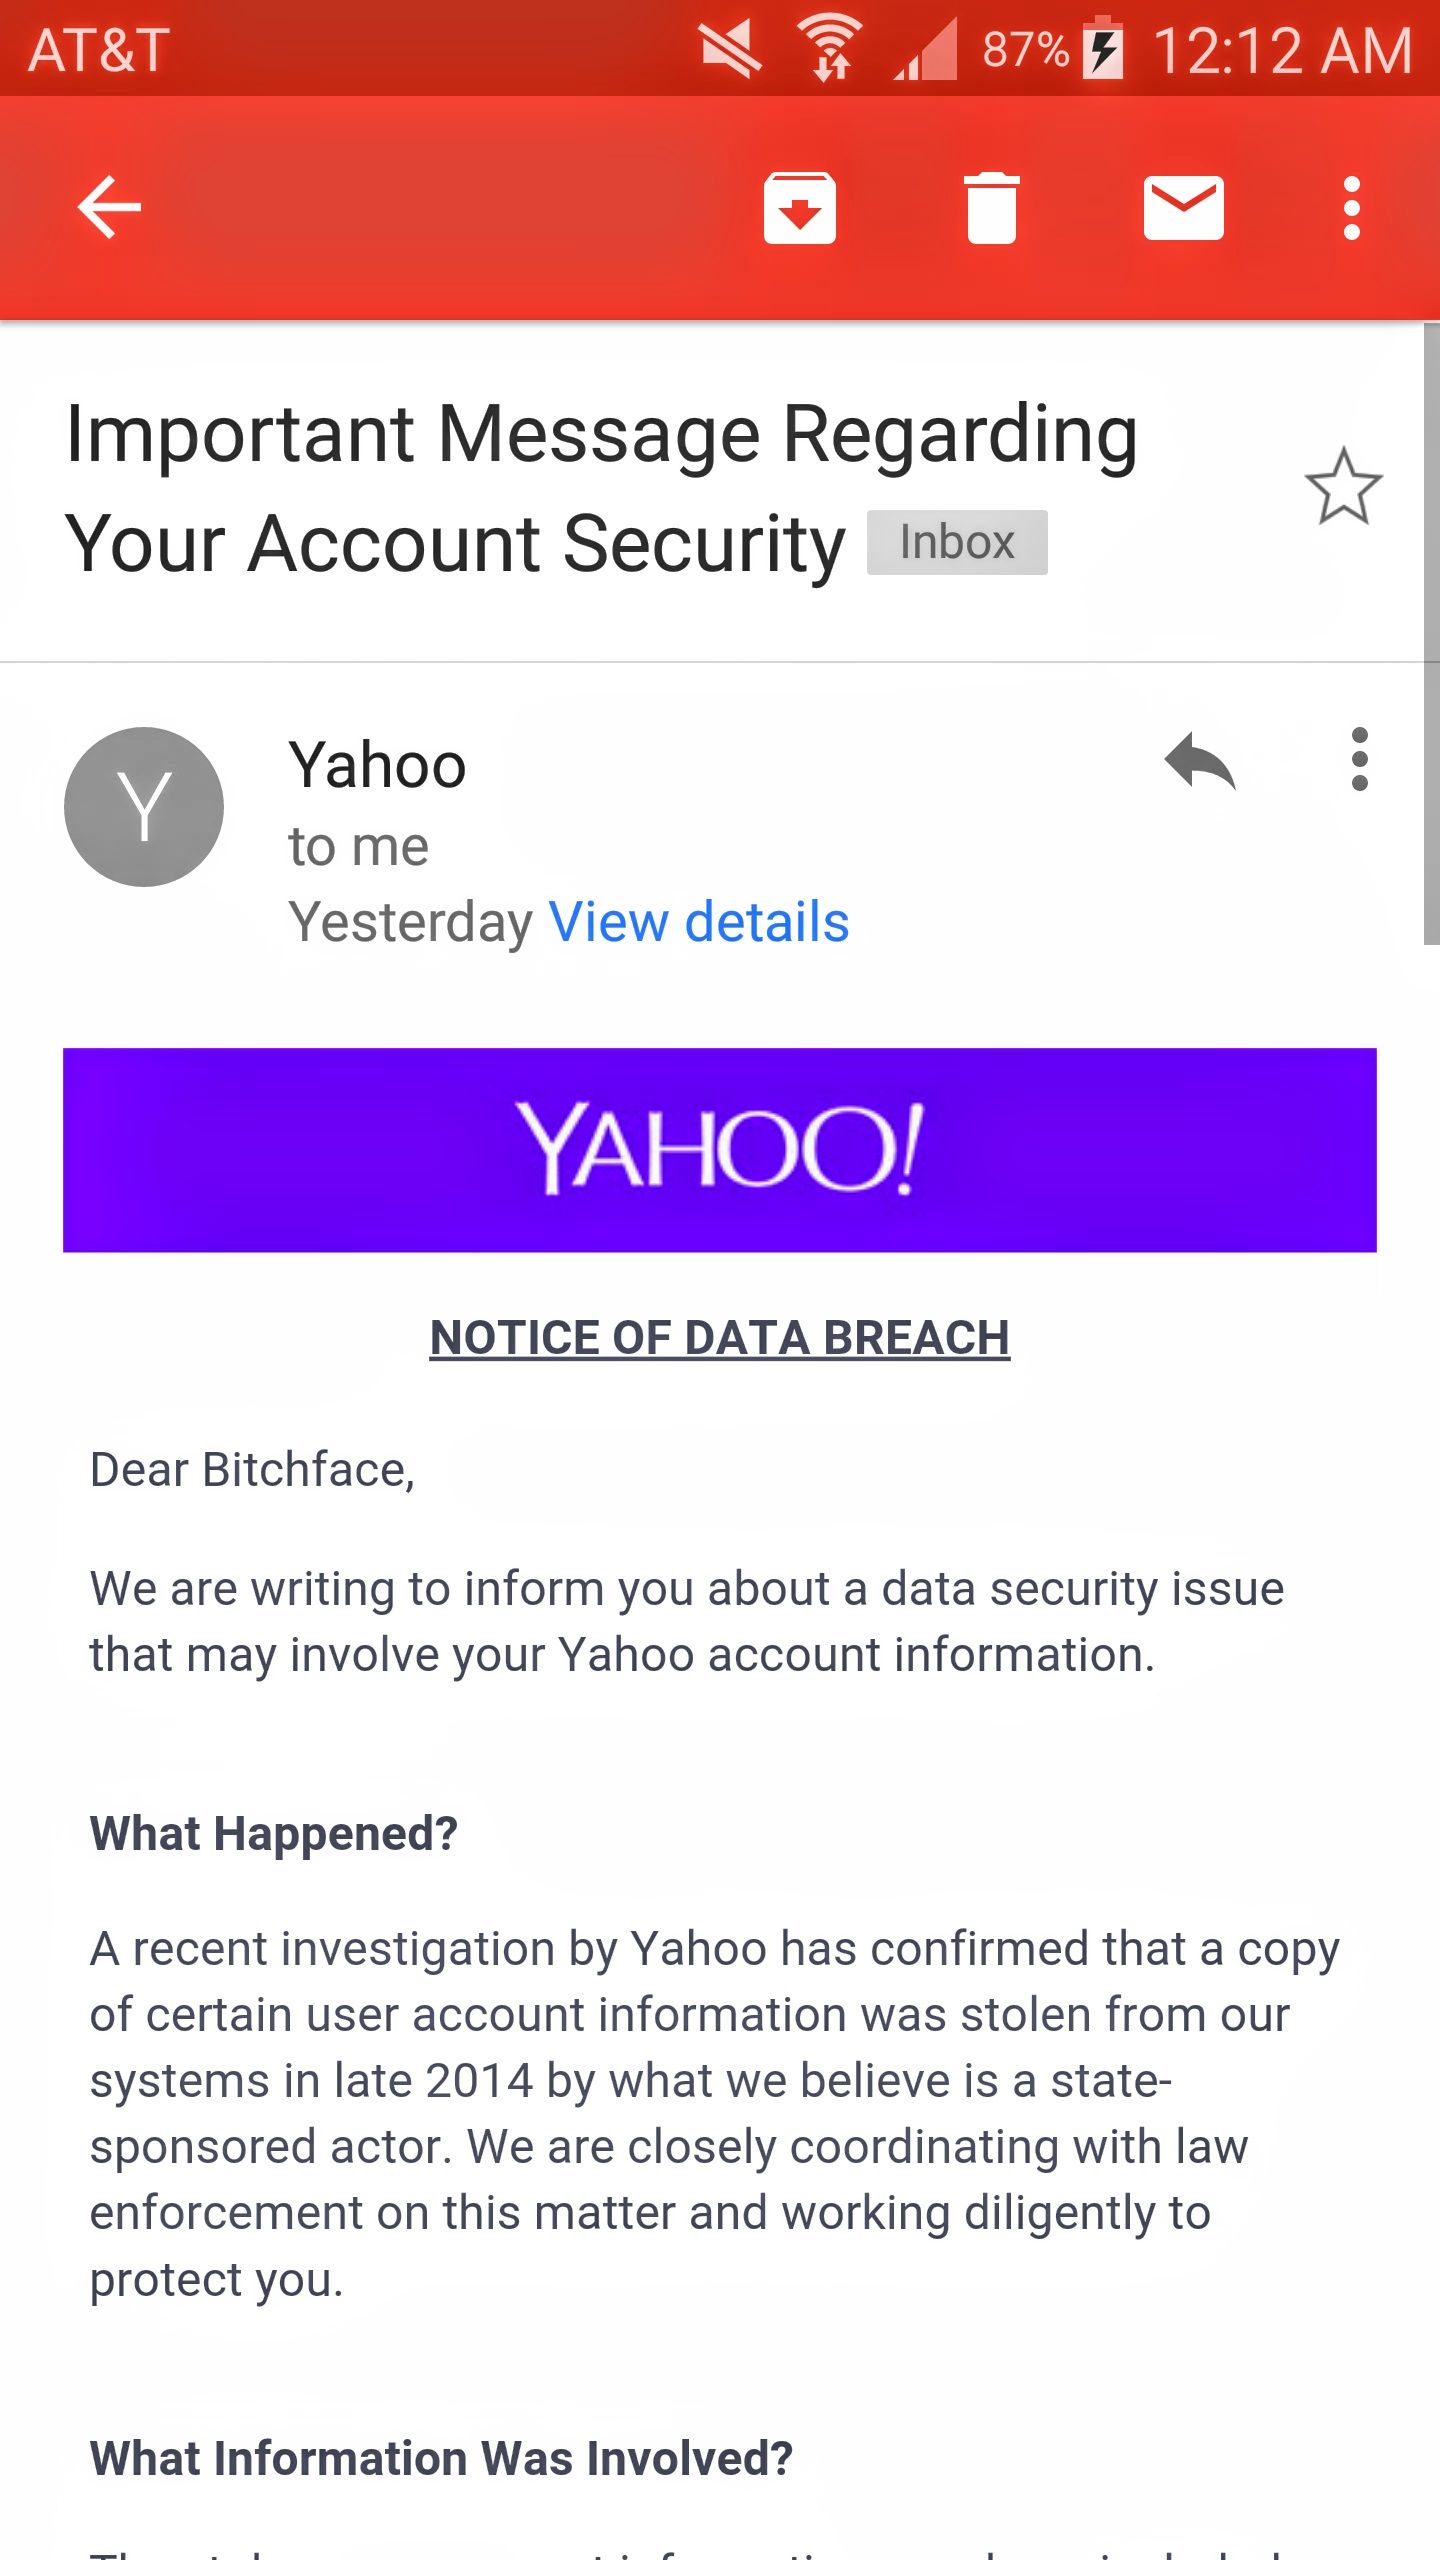 Haven't used my Yahoo account in about 10 years. Got a laugh when I got the mass data breach email and saw the name I used when I created my account.